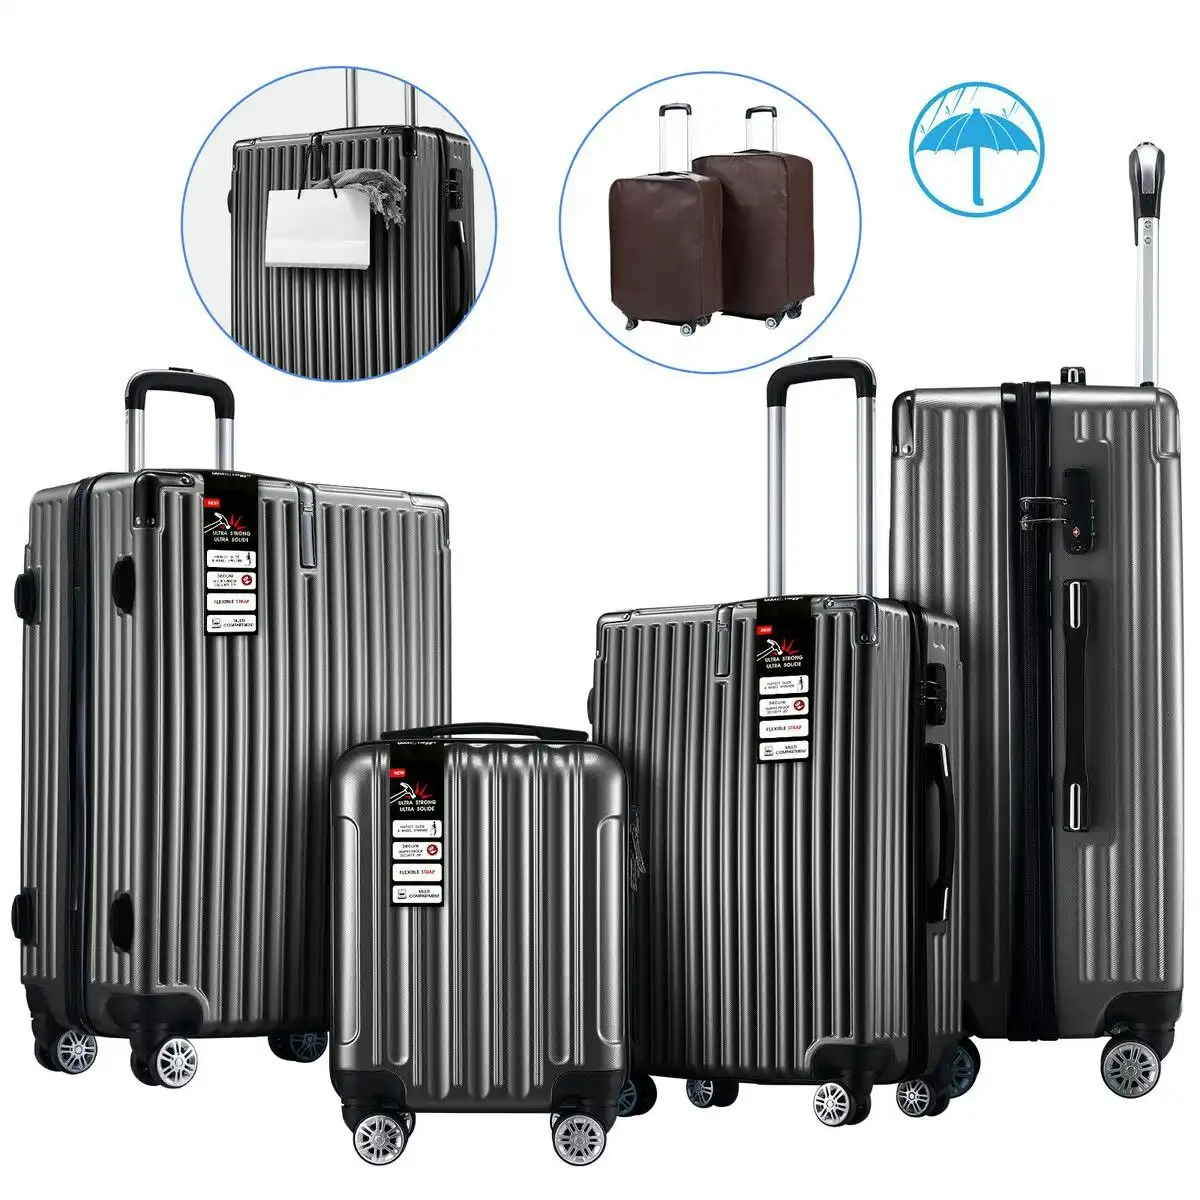 Buon Viaggio Luggage Suitcase Set 4 Piece Hard Shell Traveller Bag Carry On Rolling Trolley Checked TSA Lock Front Hook Lightweight Iron Grey